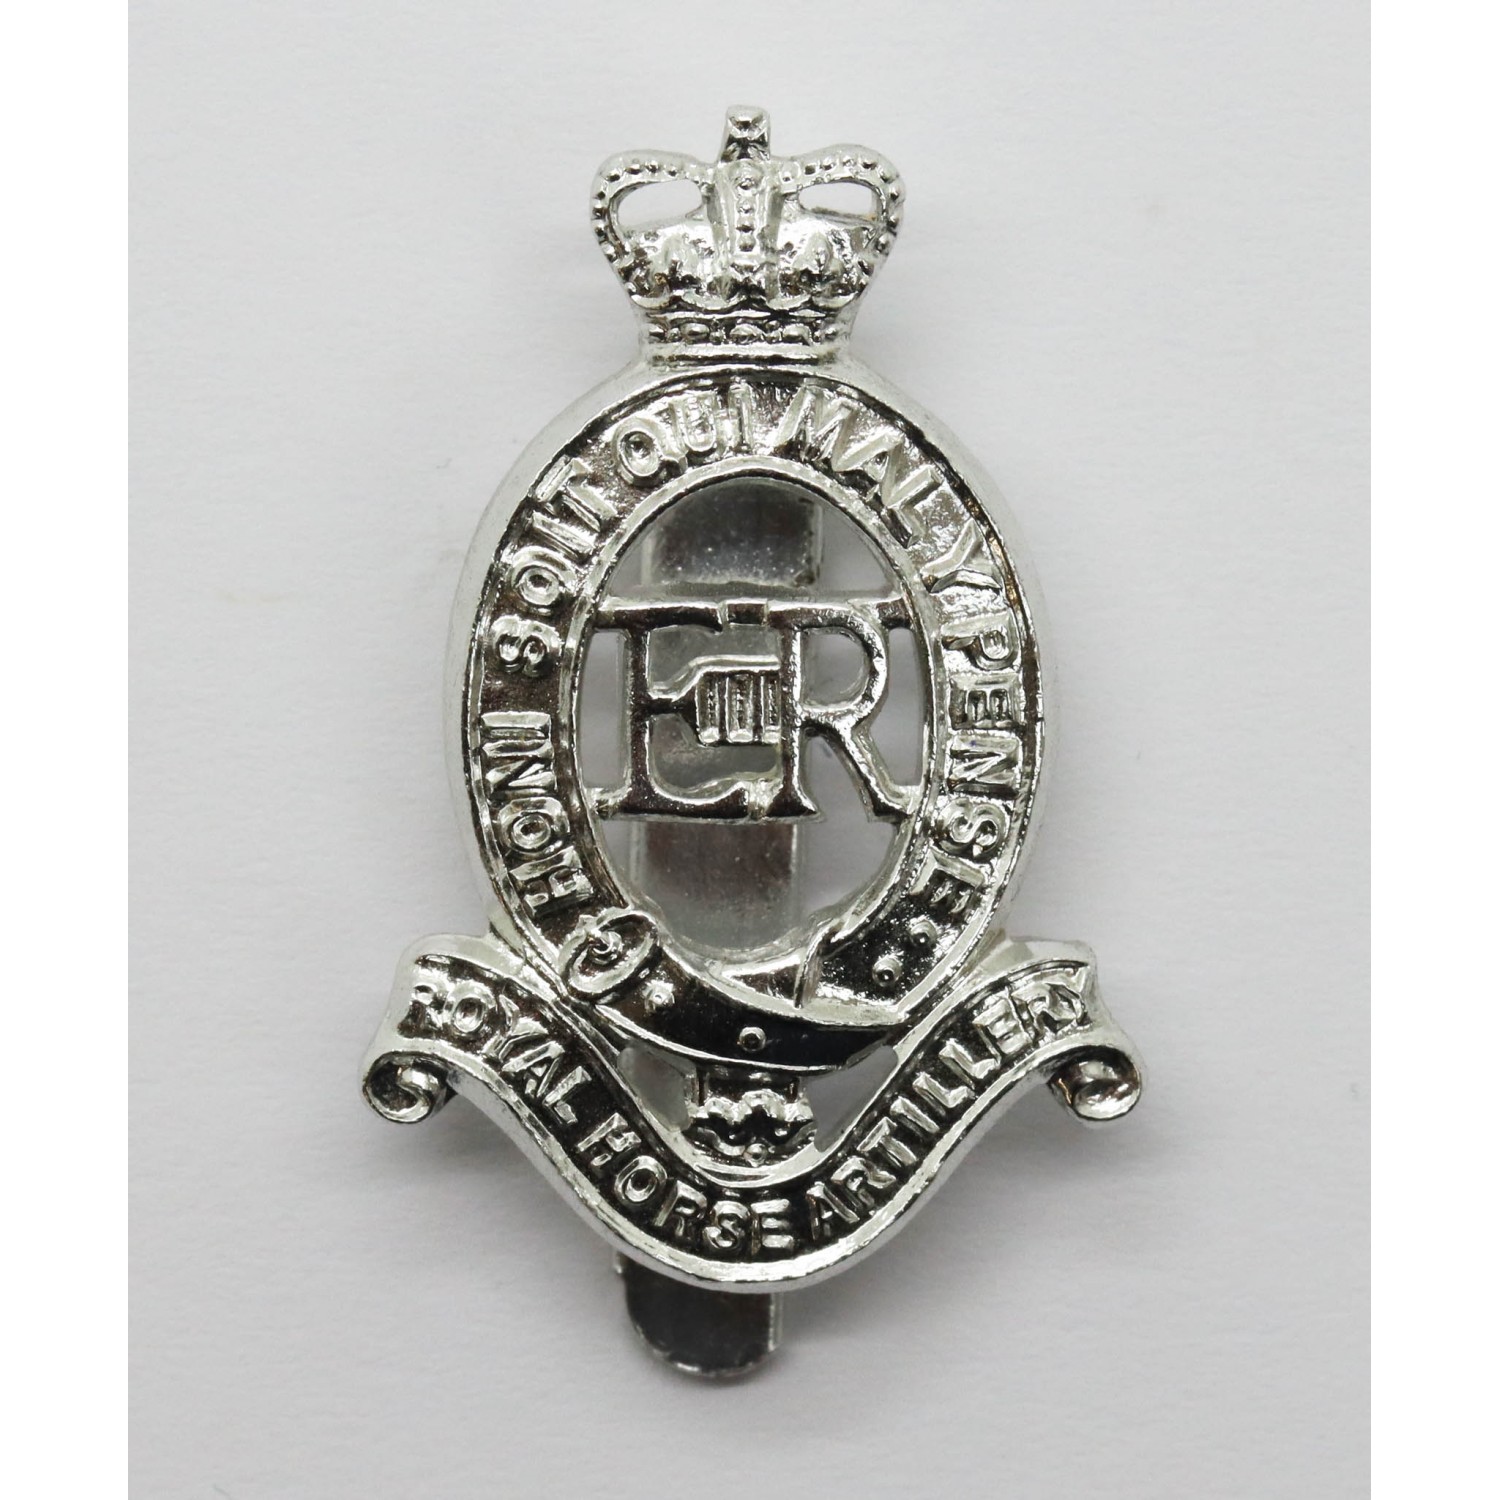 Royal Horse Artillery in anodised 